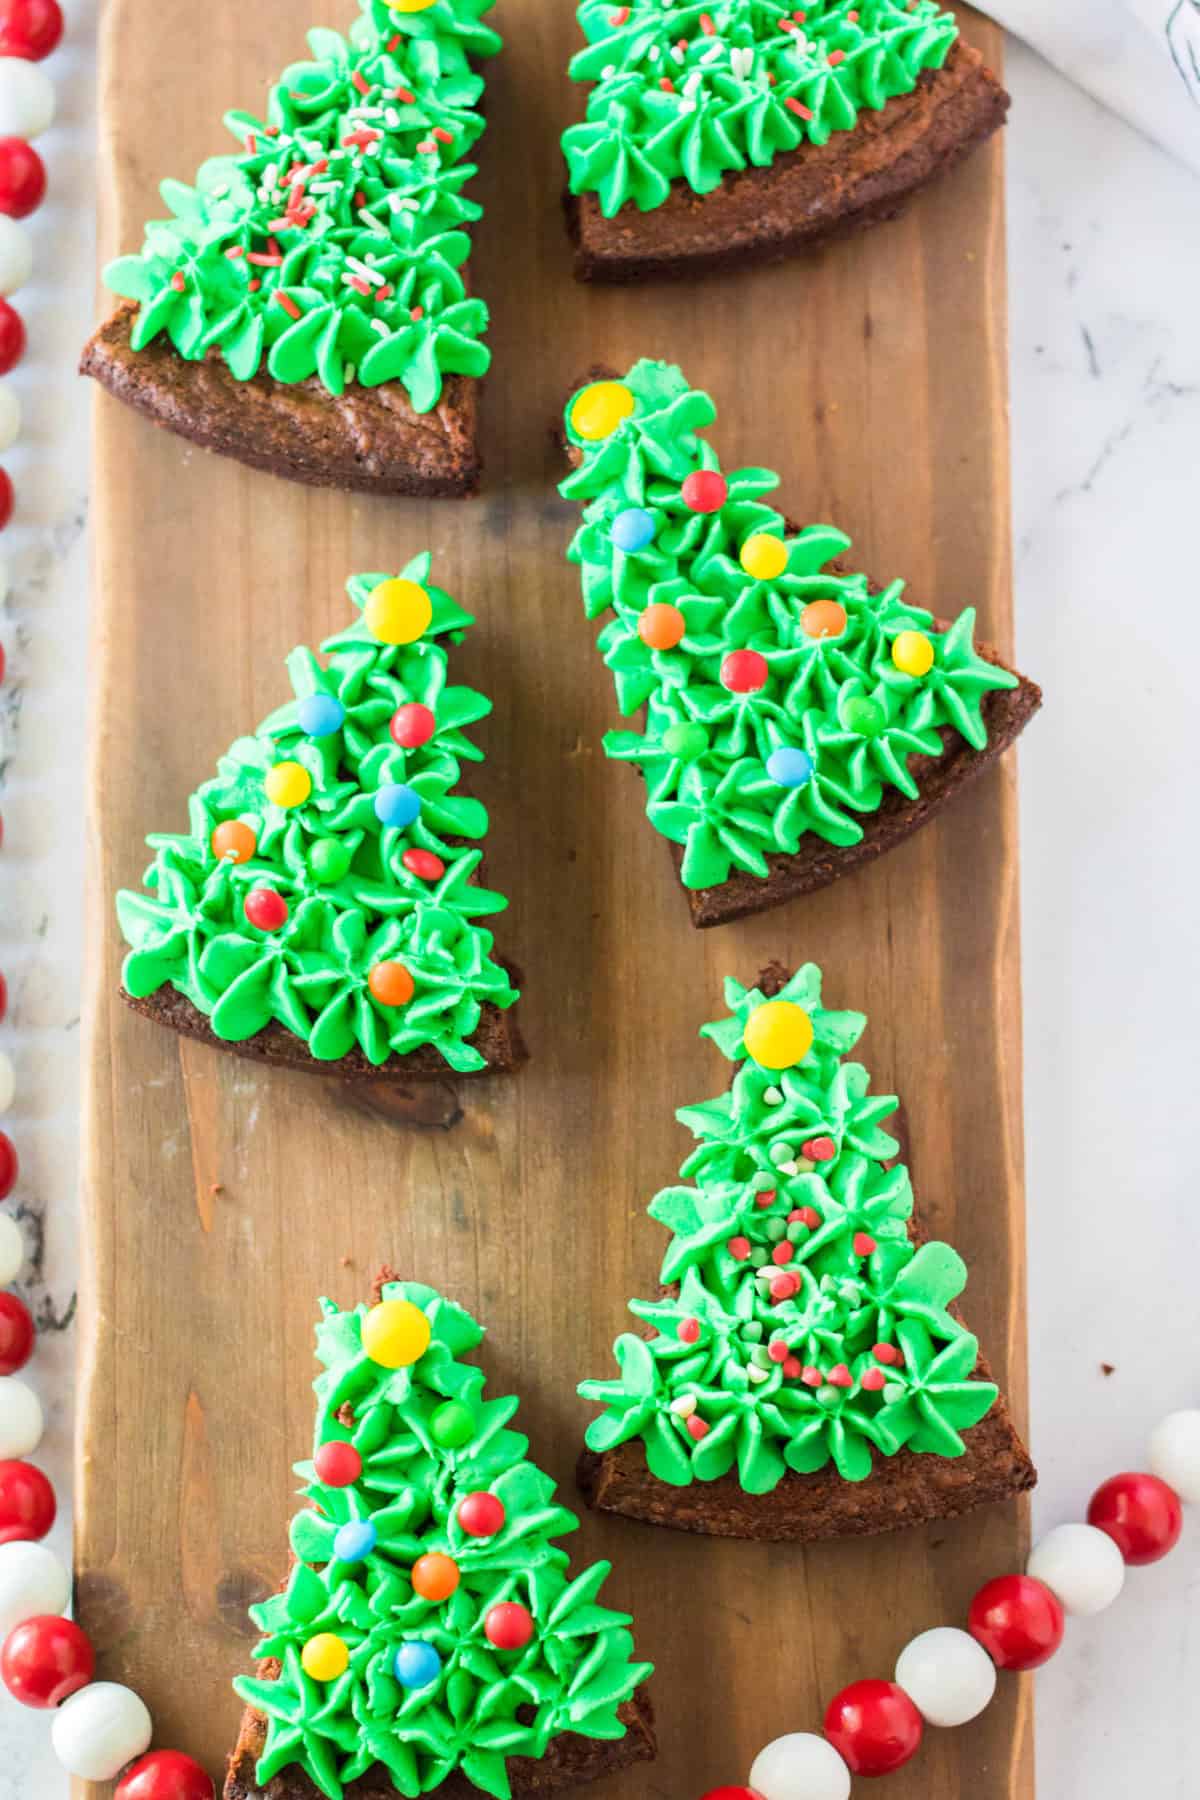 brownies cut into triangles and frosted with green frosting and sprinkles to look like Christmas trees on wooden background